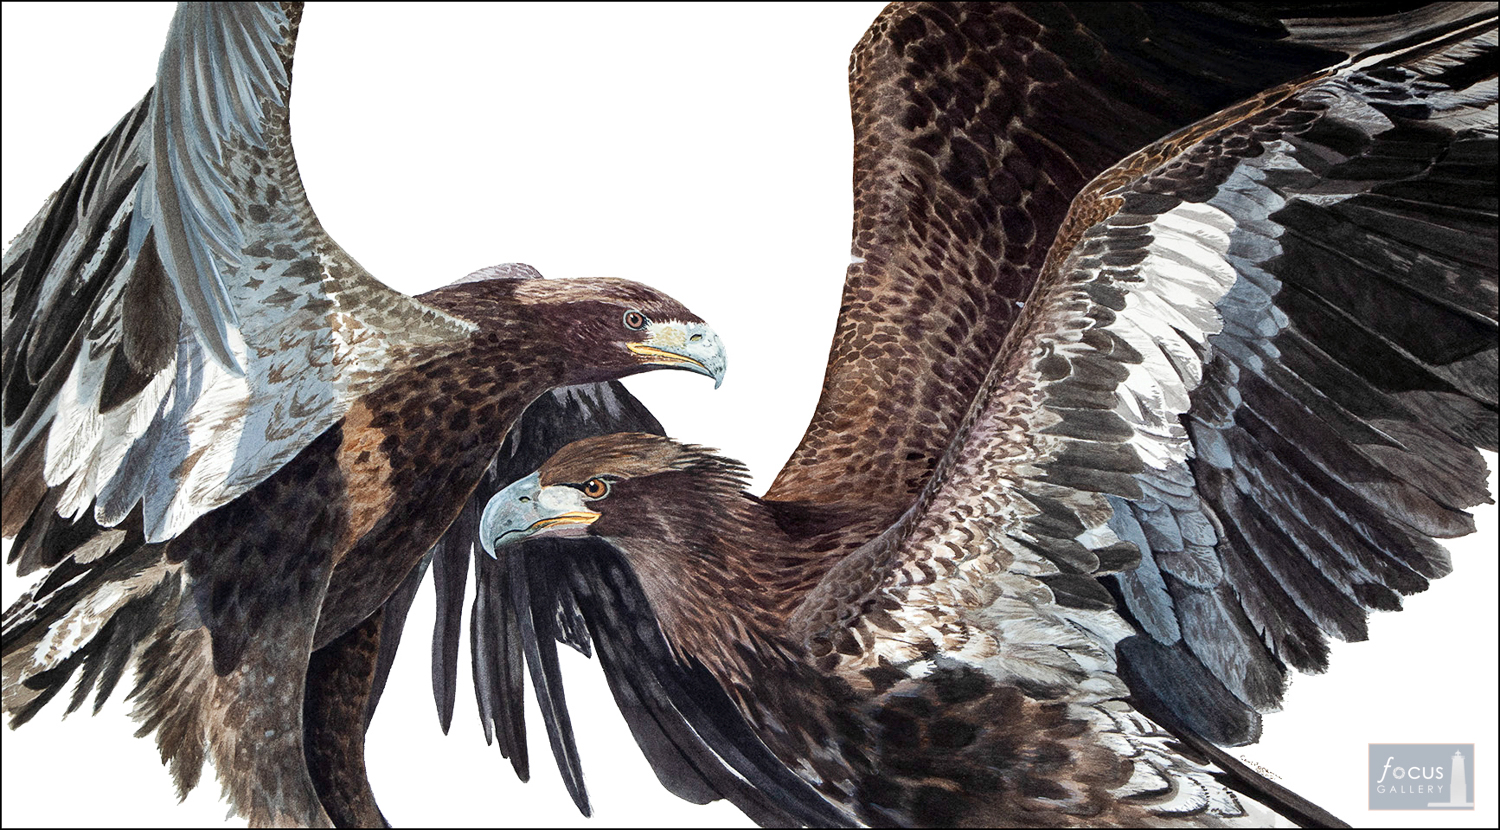 Original watercolor painting of two immature Bald Eagle birds fighting.